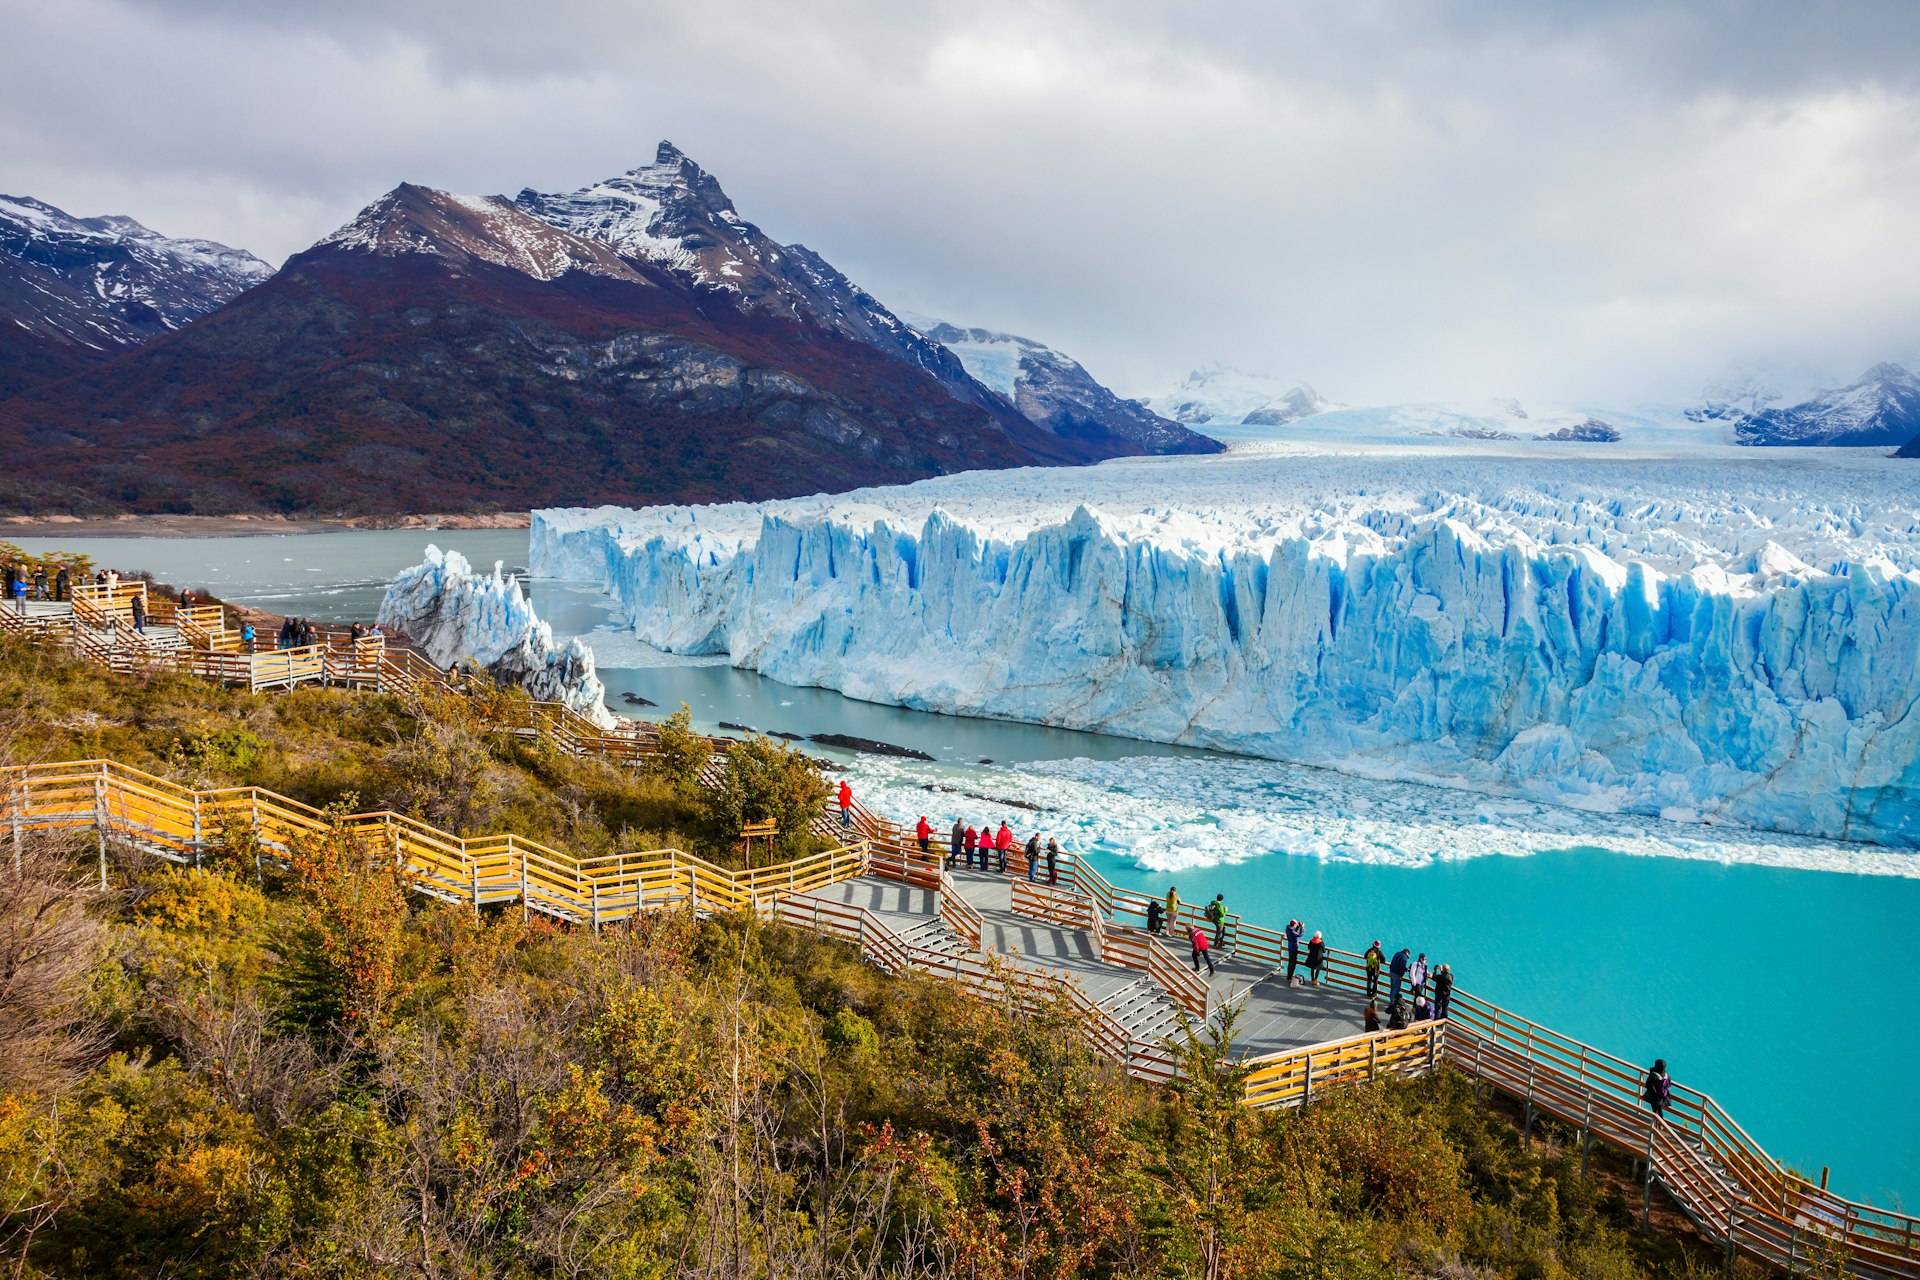 A wide-angle shot of visitors on a platform overlooking the blue and white Perito Moreno Glacier